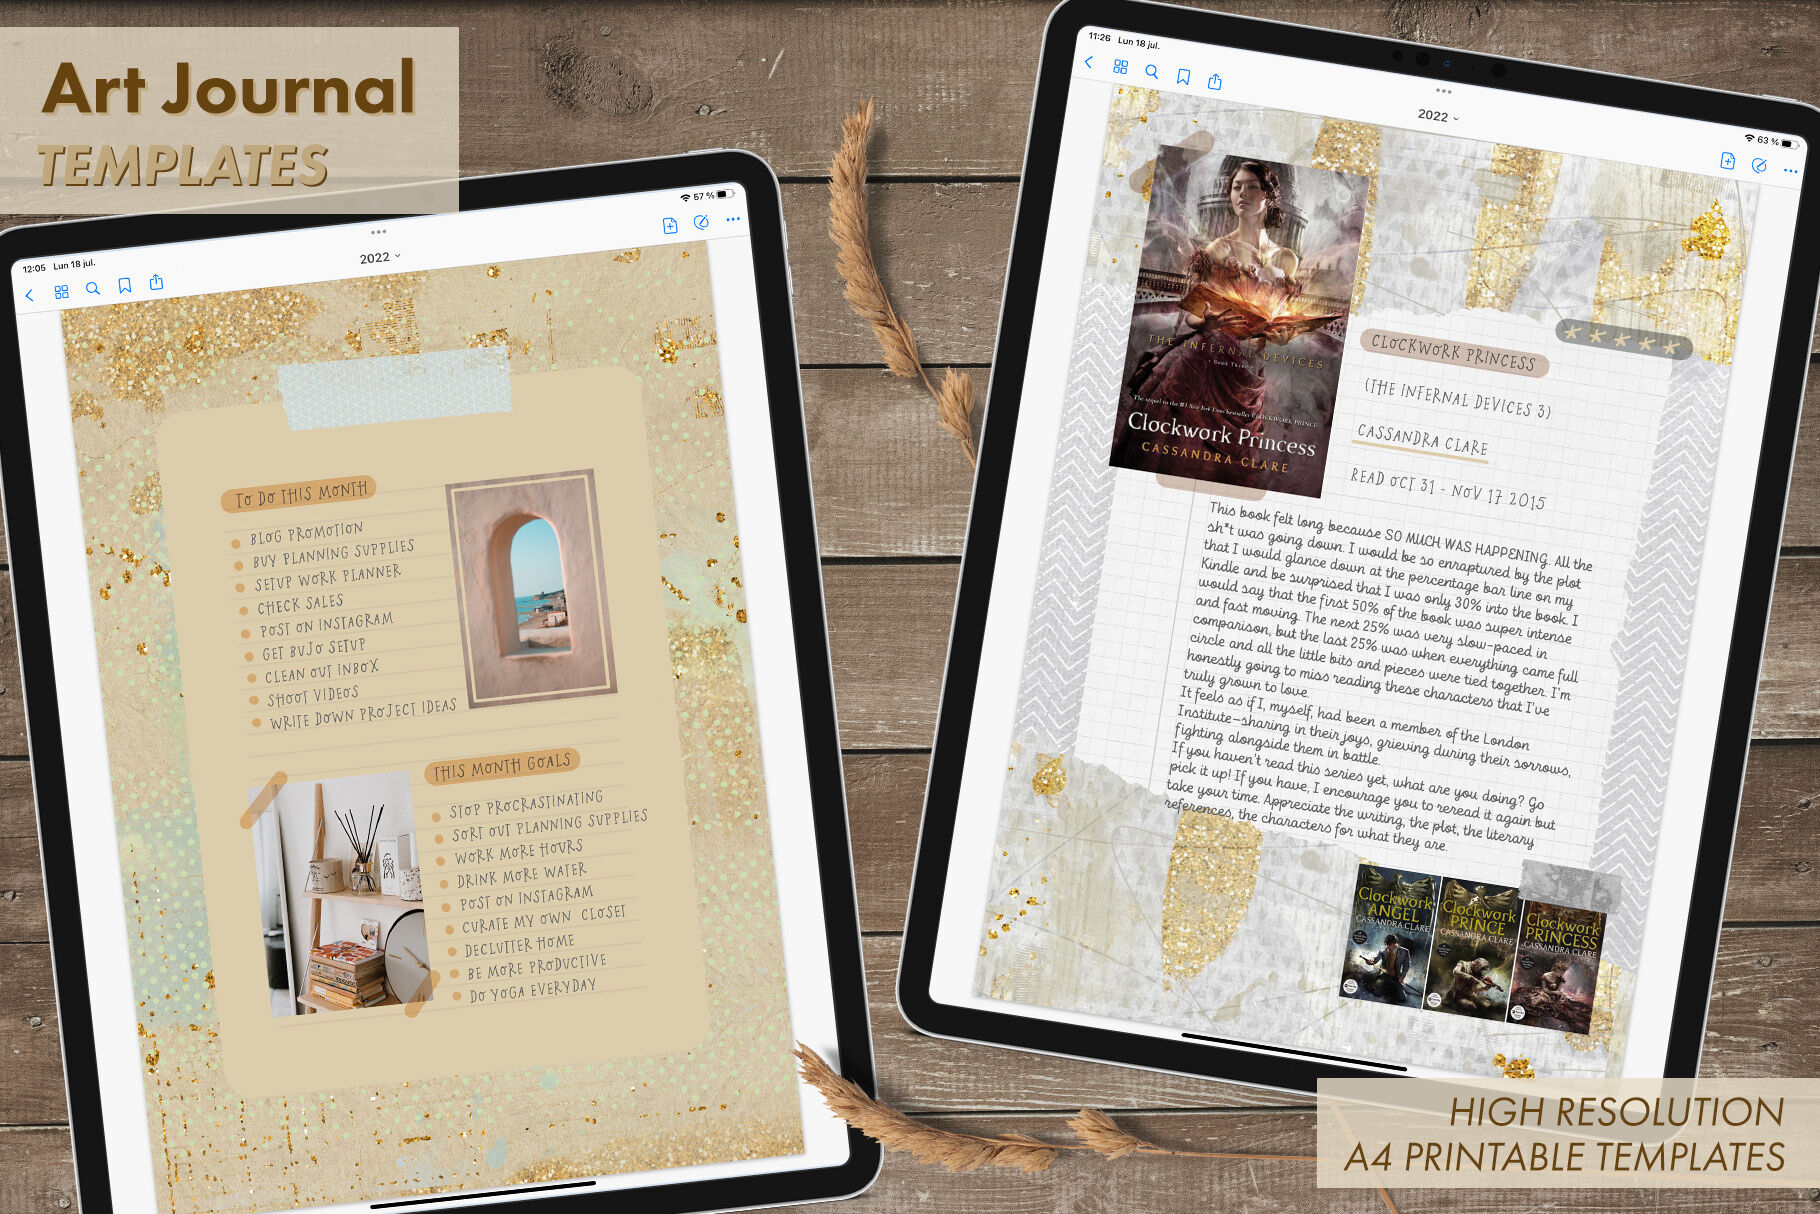 Art Journal Templates By LuOtero